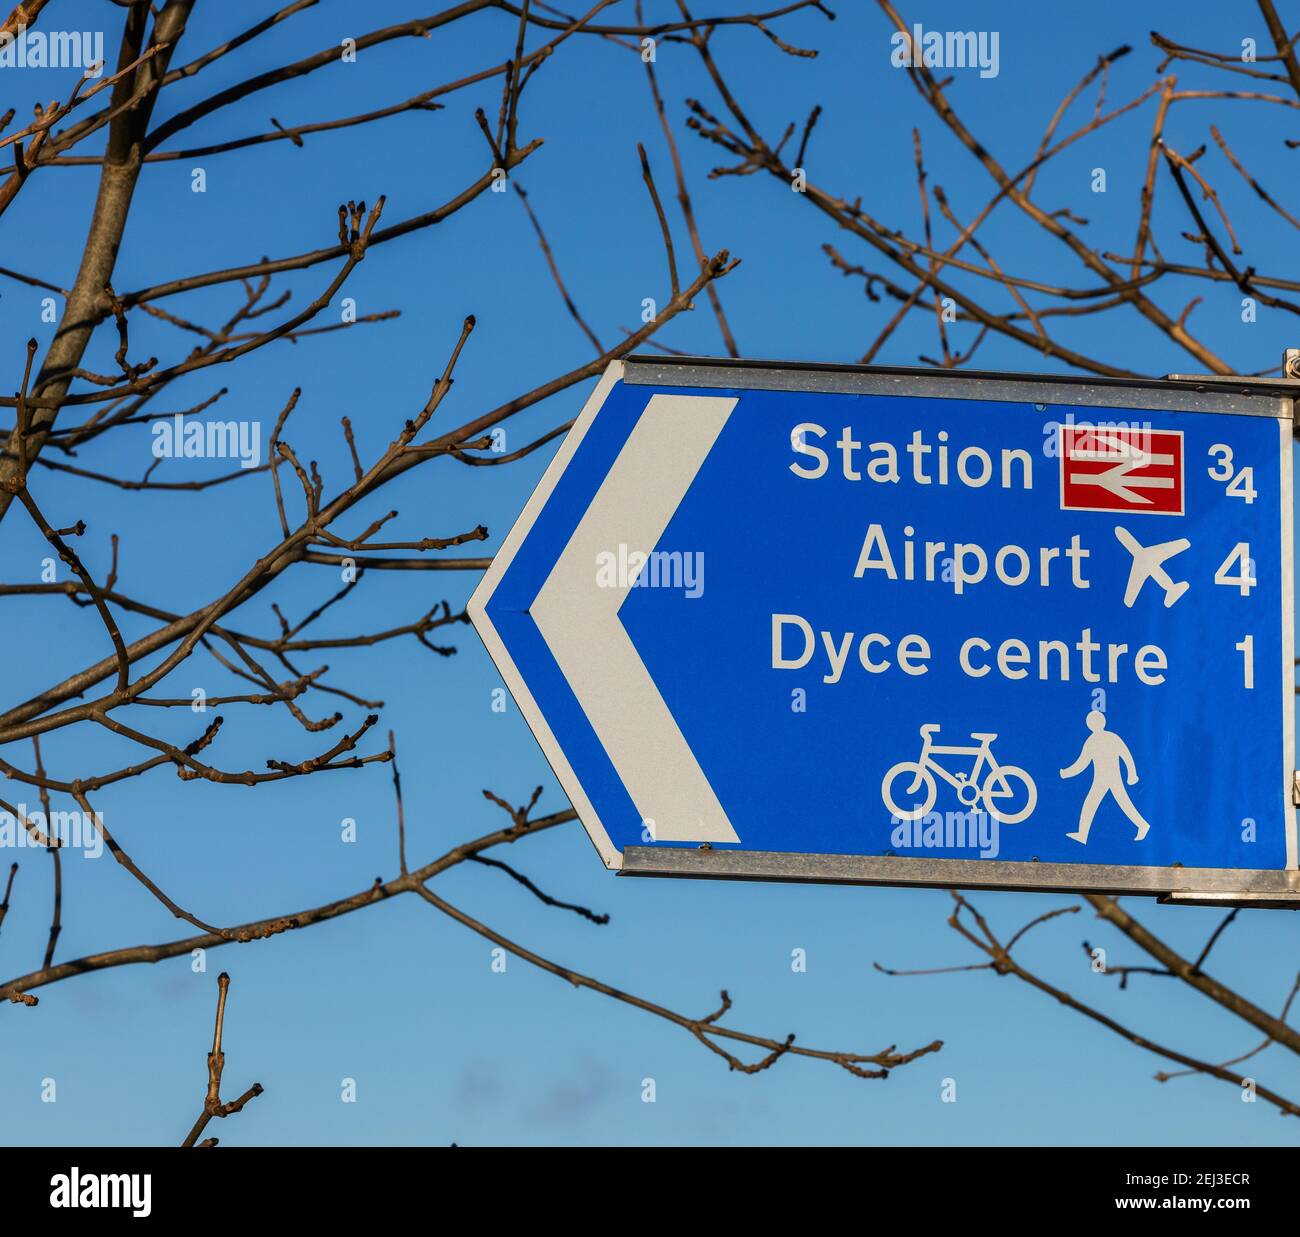 Sign in Dyce showing directions to Dyce railway station and the airport, as well as other ameneties in the city of Aberdeen, Scotland Stock Photo